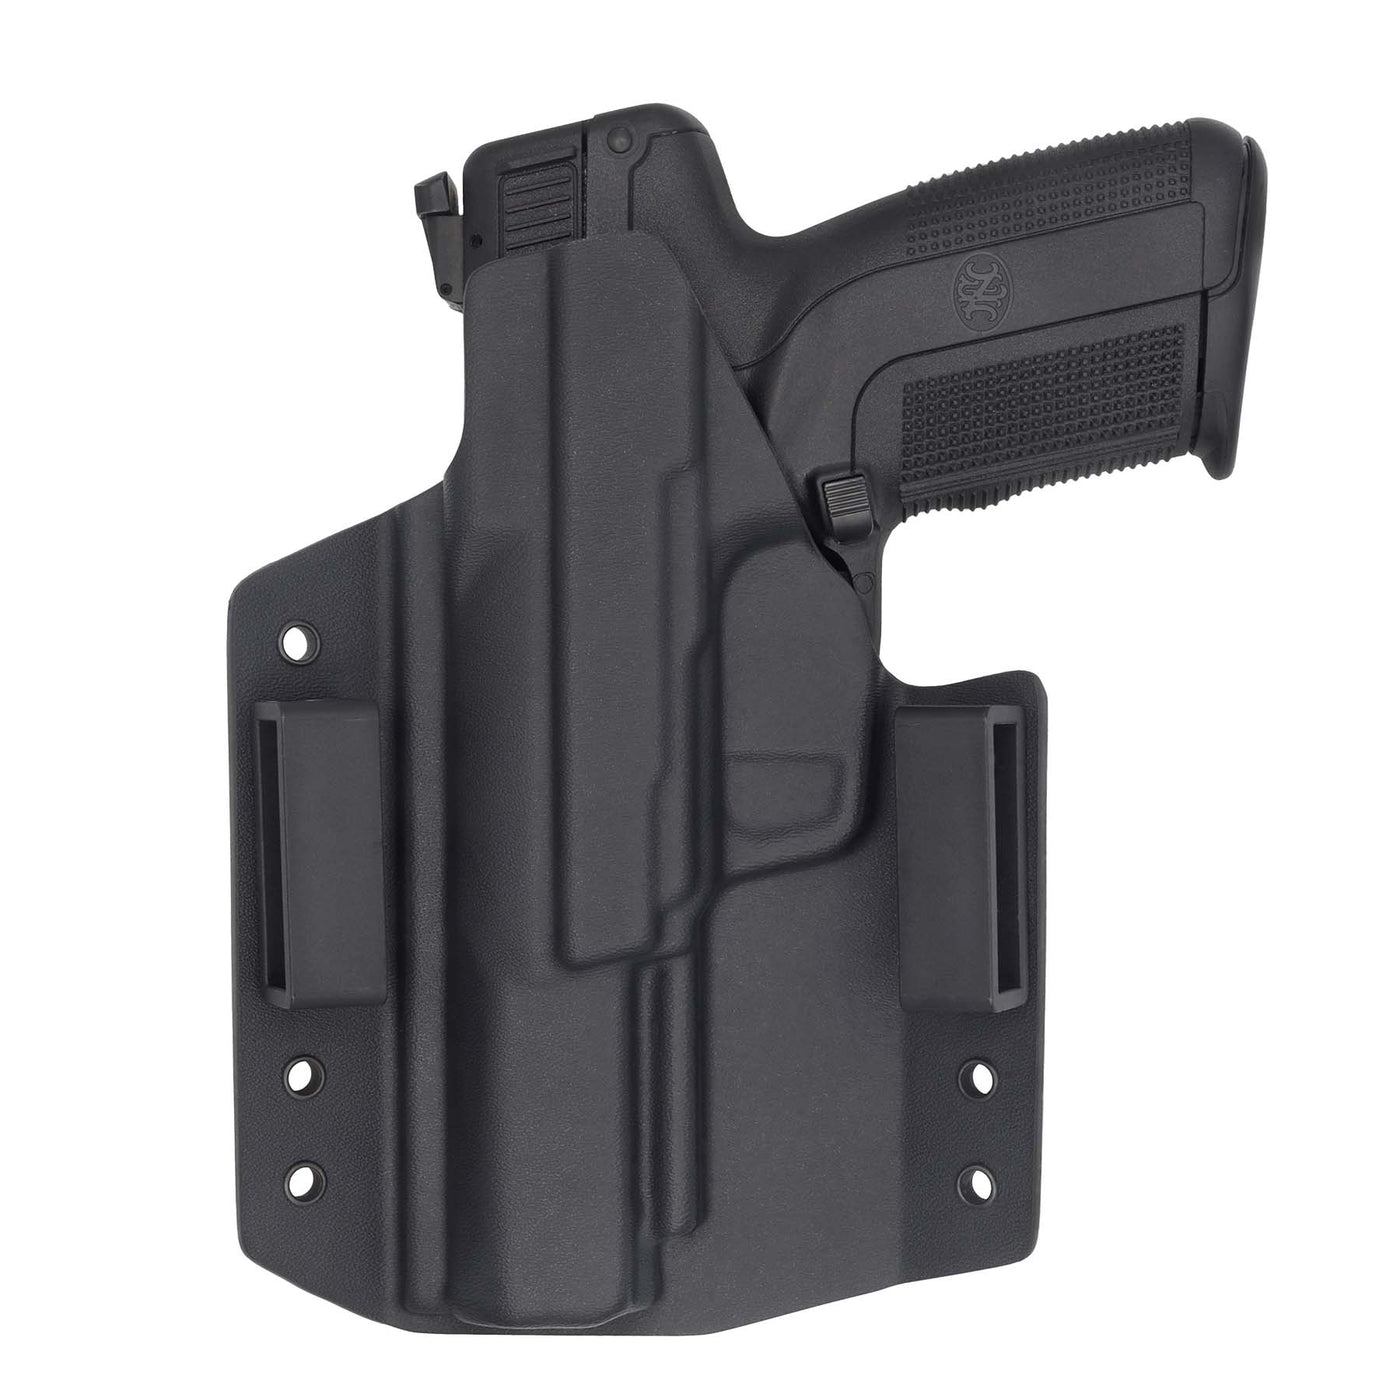 C&G Holsters Covert outside the waistband kydex holster for FN Five-seveN 5.7" holstered rear view